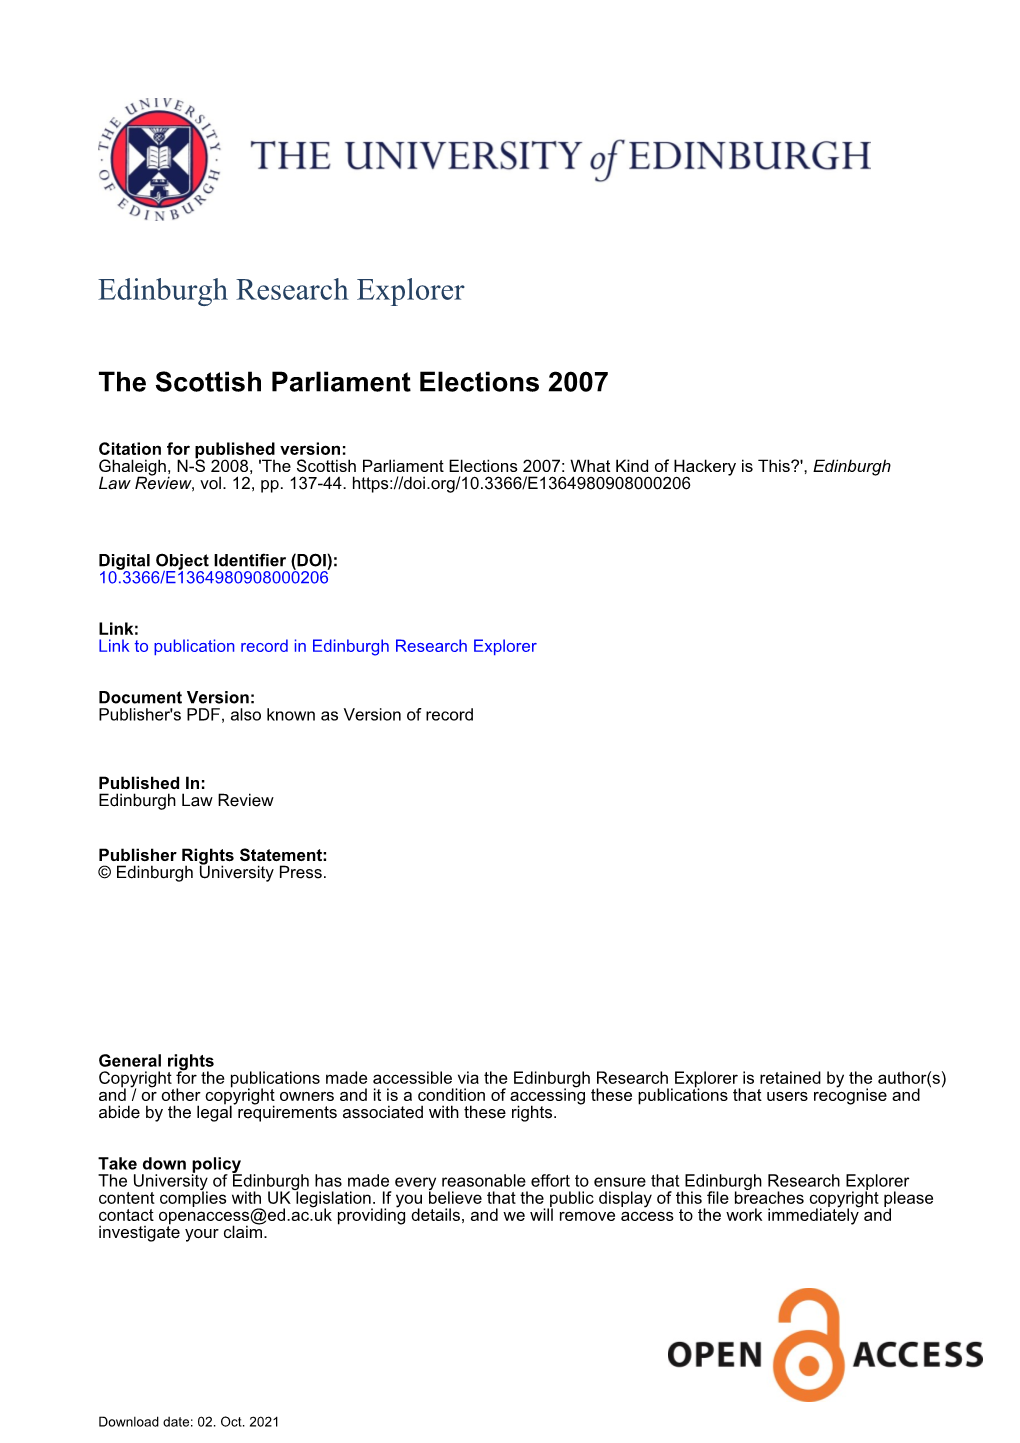 The Scottish Parliament Elections 2007